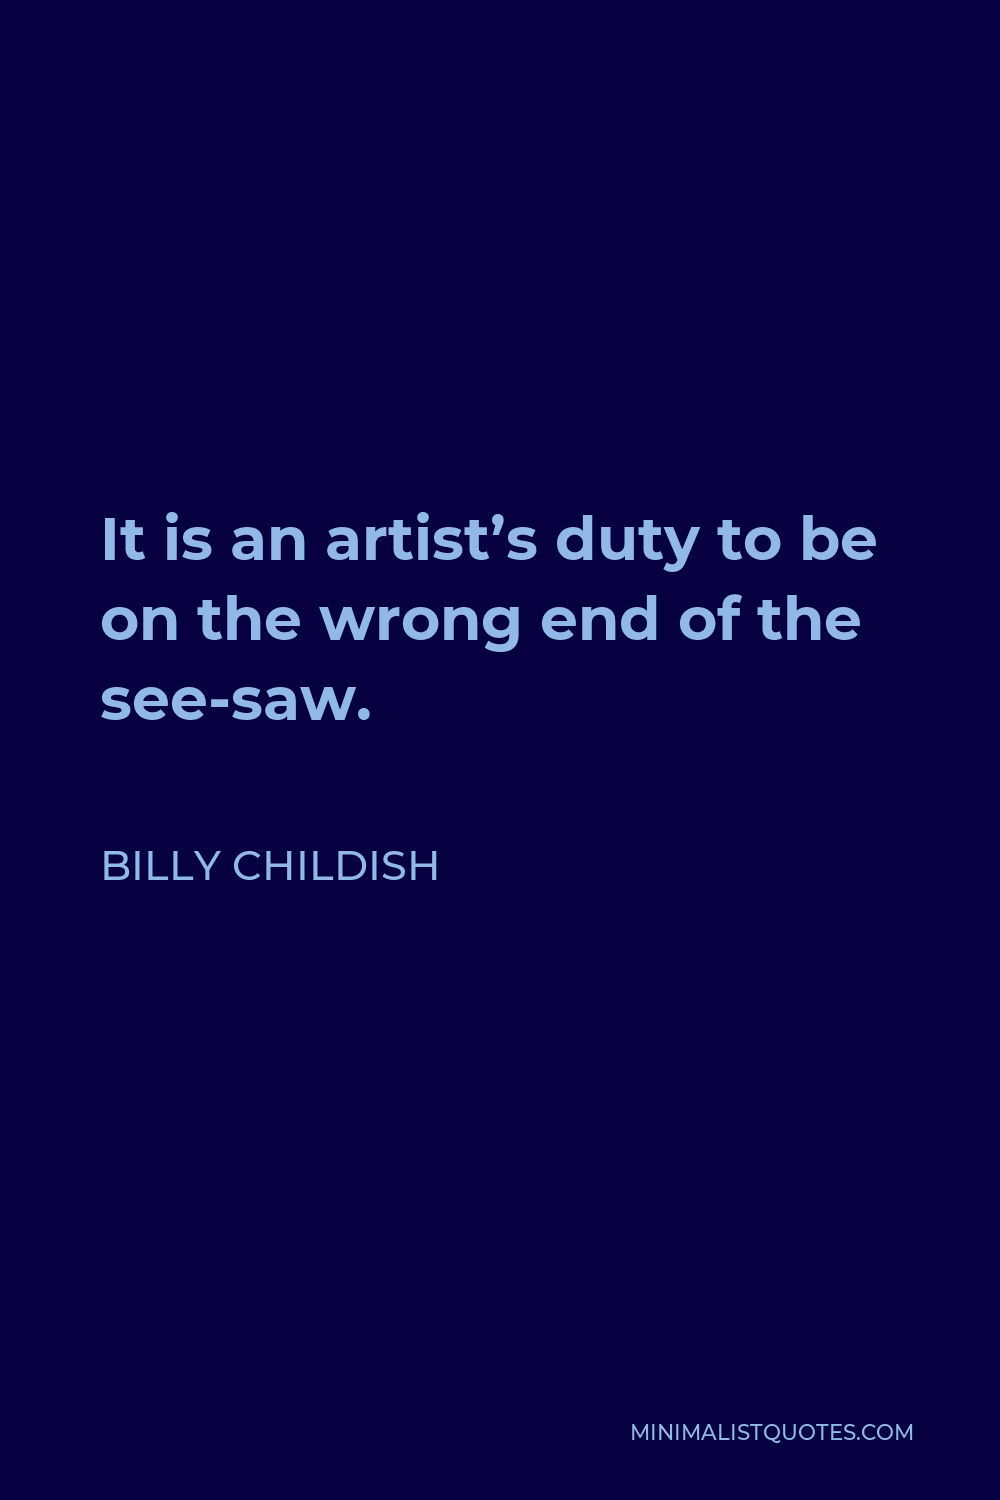 Billy Childish Quote - It is an artist’s duty to be on the wrong end of the see-saw.